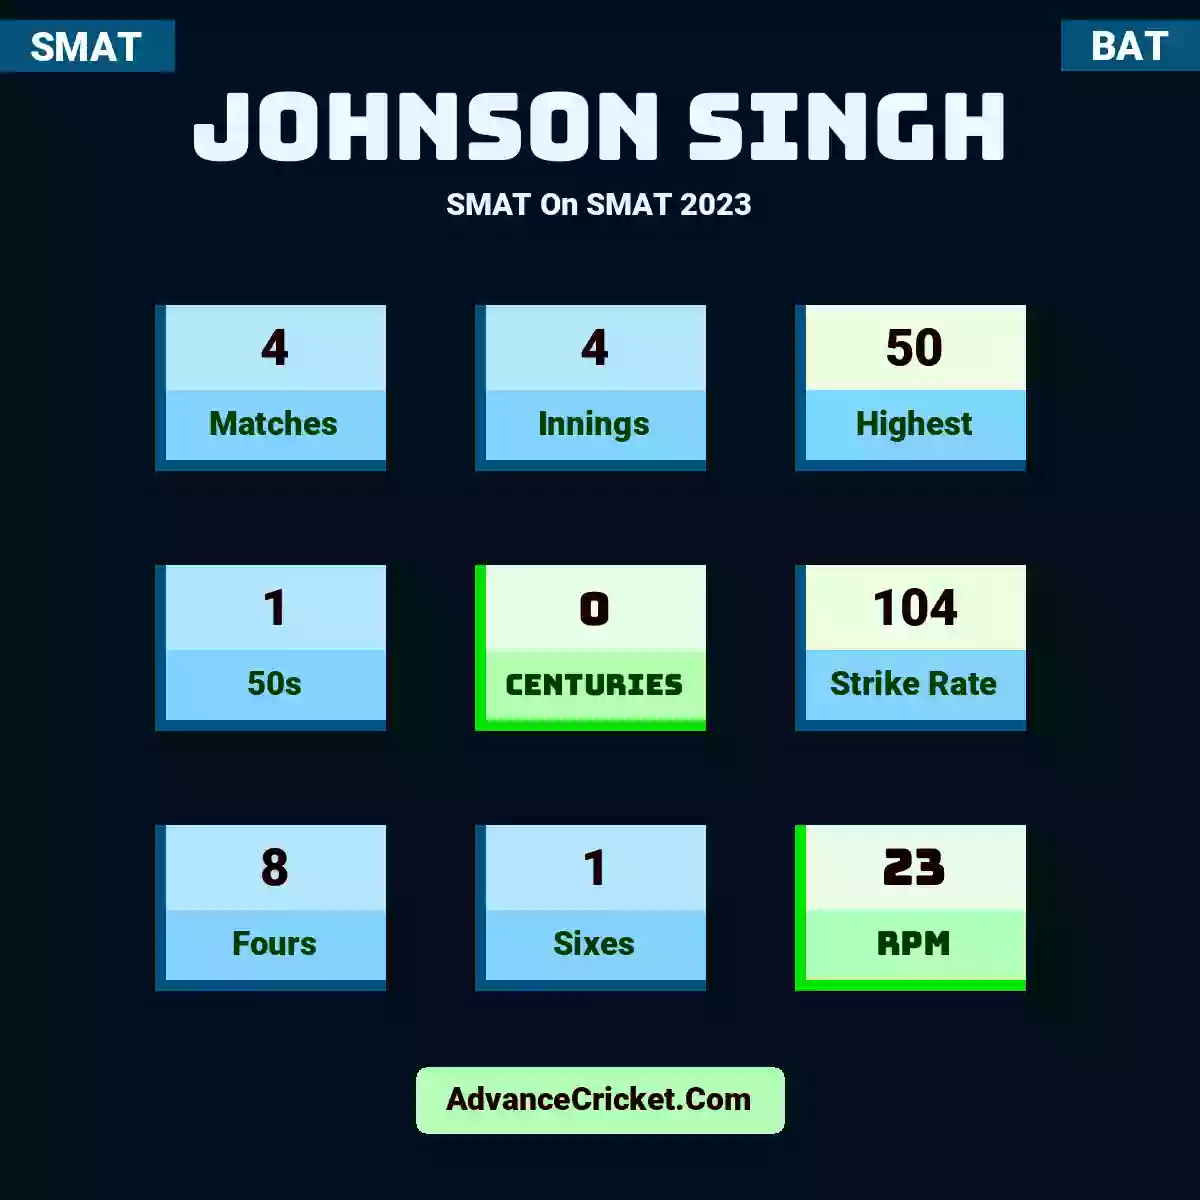 Johnson Singh SMAT  On SMAT 2023, Johnson Singh played 4 matches, scored 50 runs as highest, 1 half-centuries, and 0 centuries, with a strike rate of 104. J.Singh hit 8 fours and 1 sixes, with an RPM of 23.